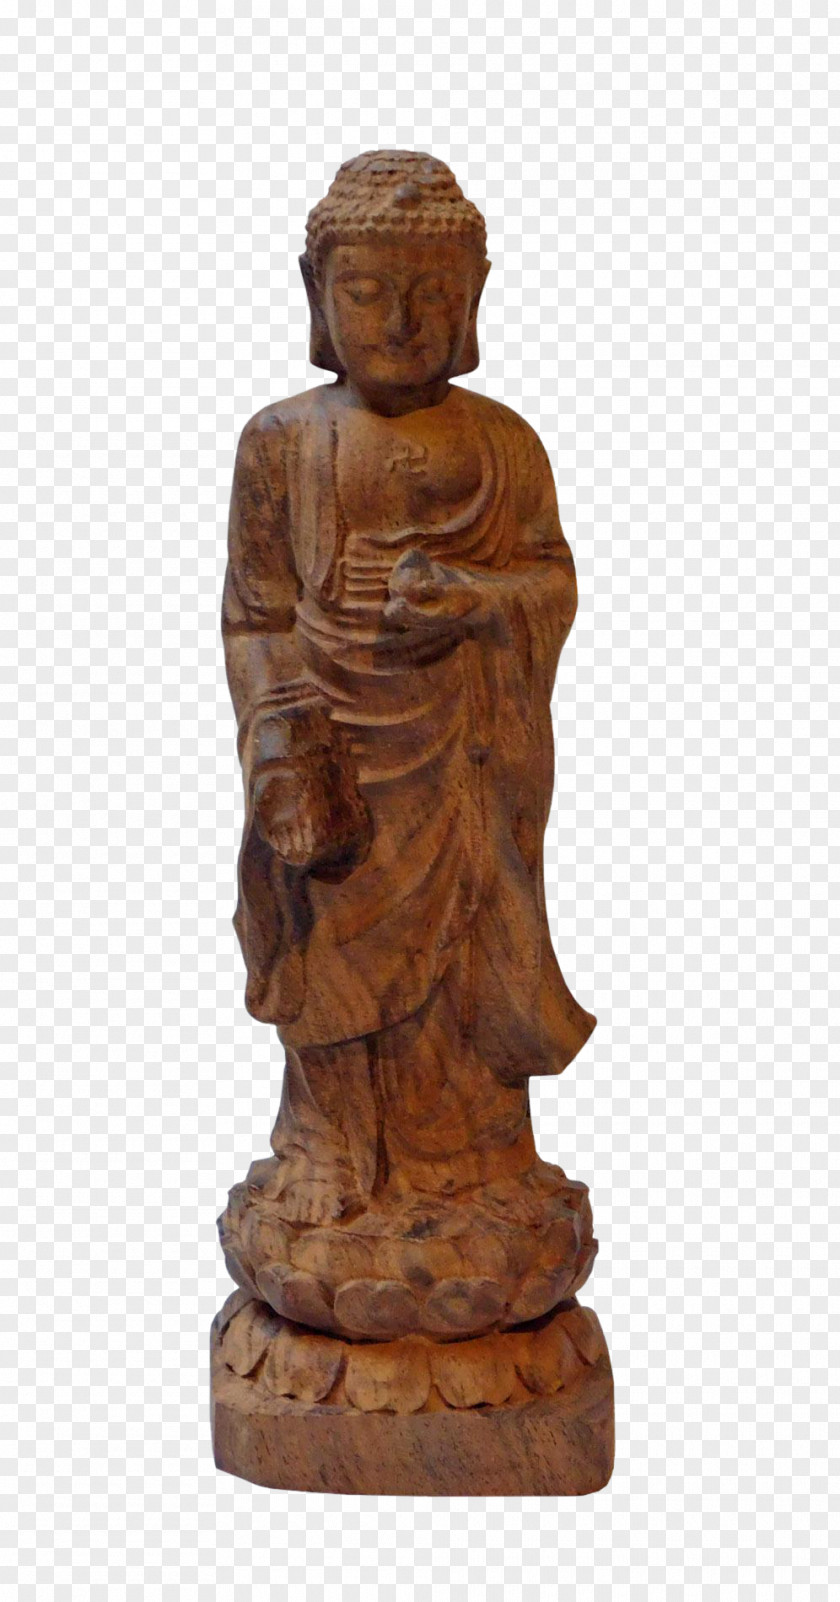 Buddha Statue Bust Classical Sculpture Carving Figurine PNG